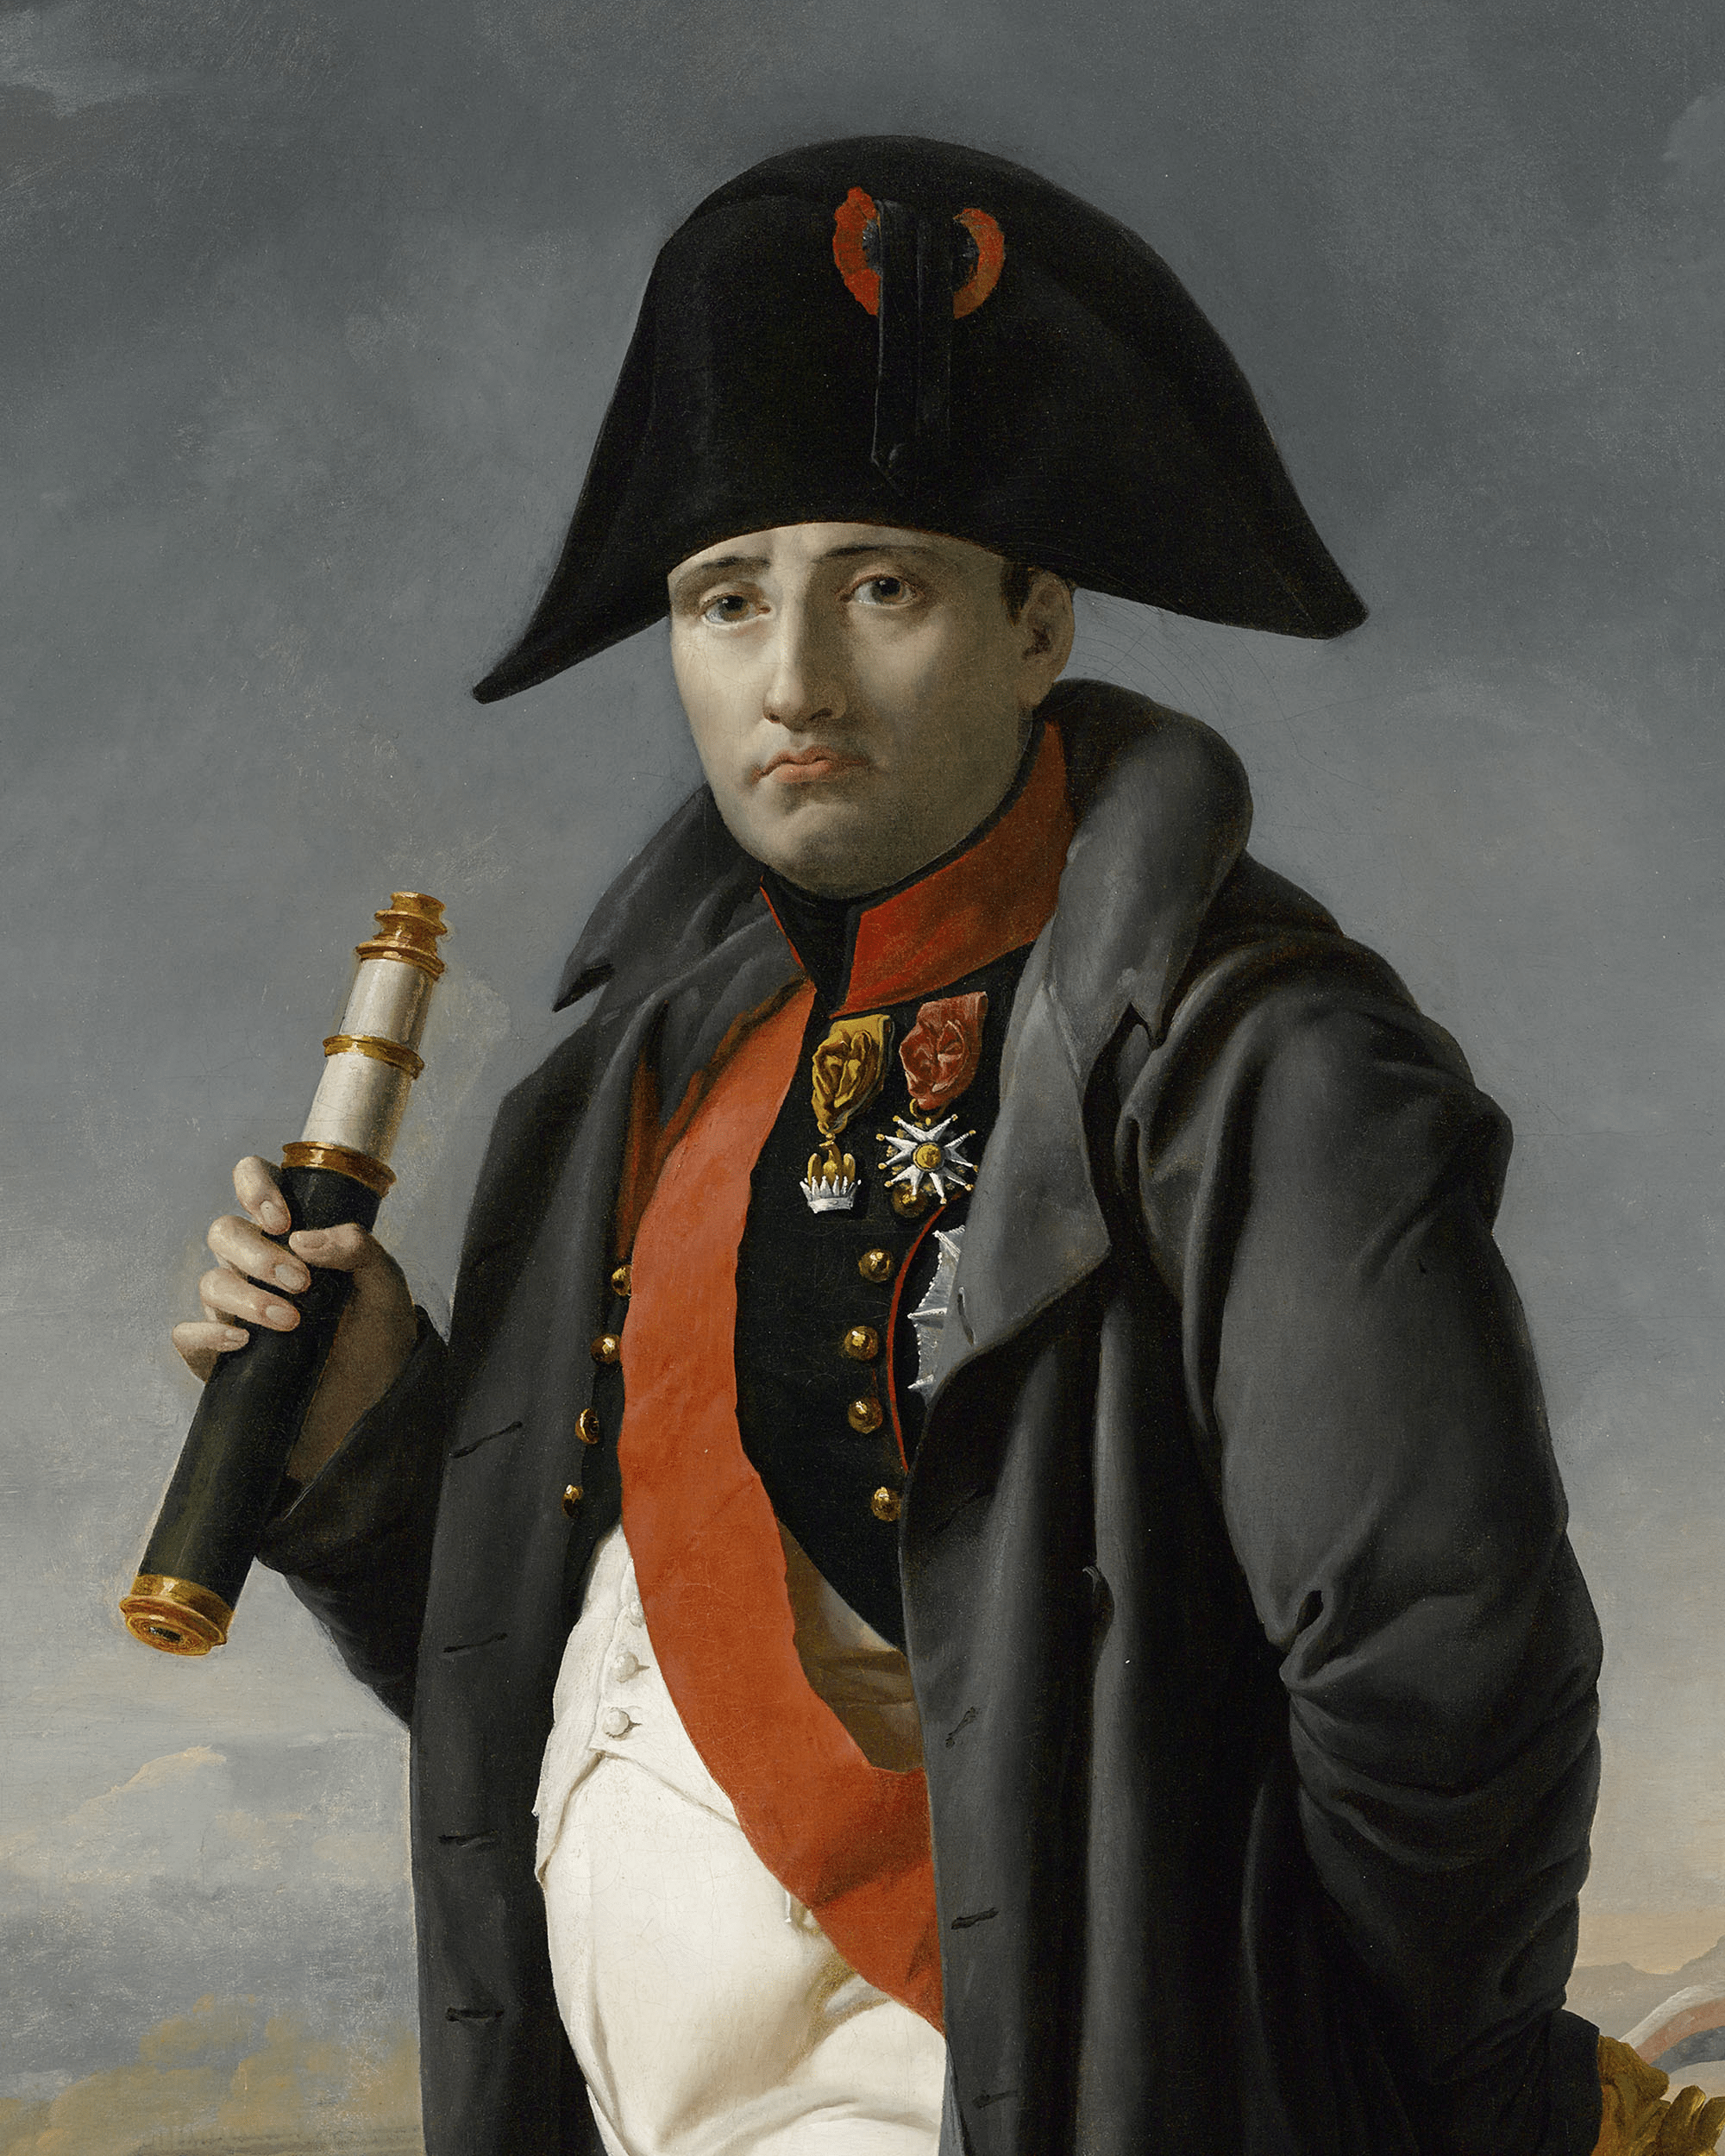 Exhibited at the Salon of 1812, it captures Napoleon at the pinnacle of his power